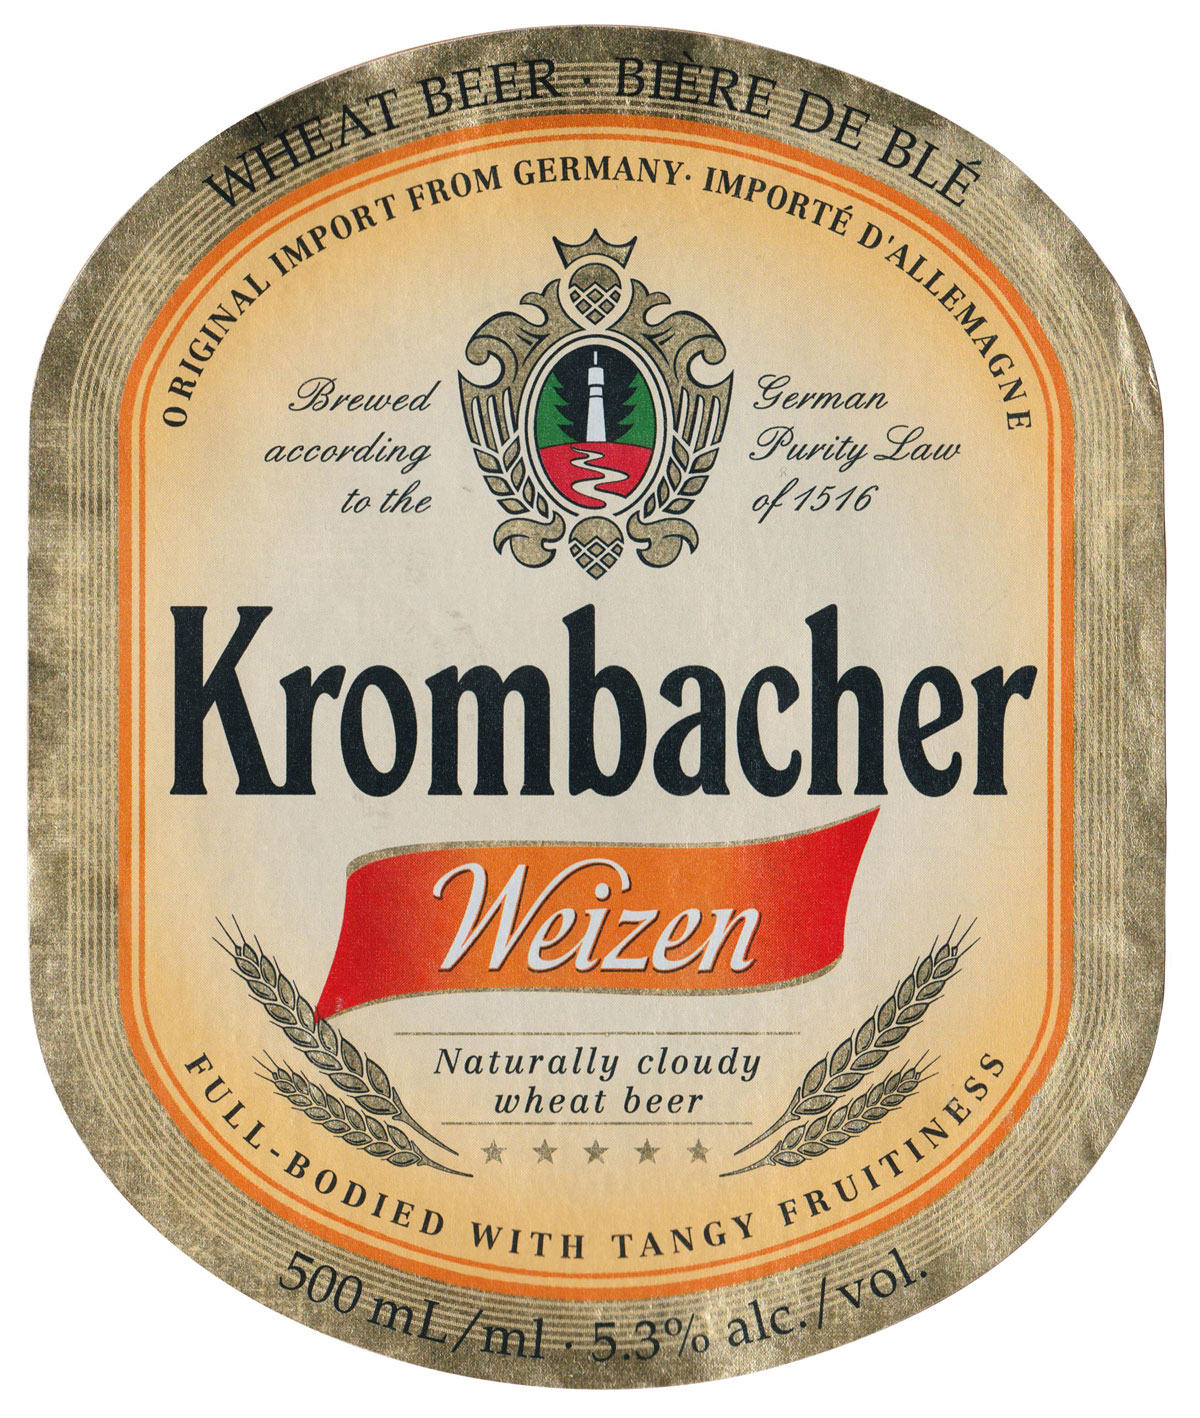 Krombacher Wheat Beer Label Hop A Beer Label Archive,How To Inject A Turkey Without An Injector